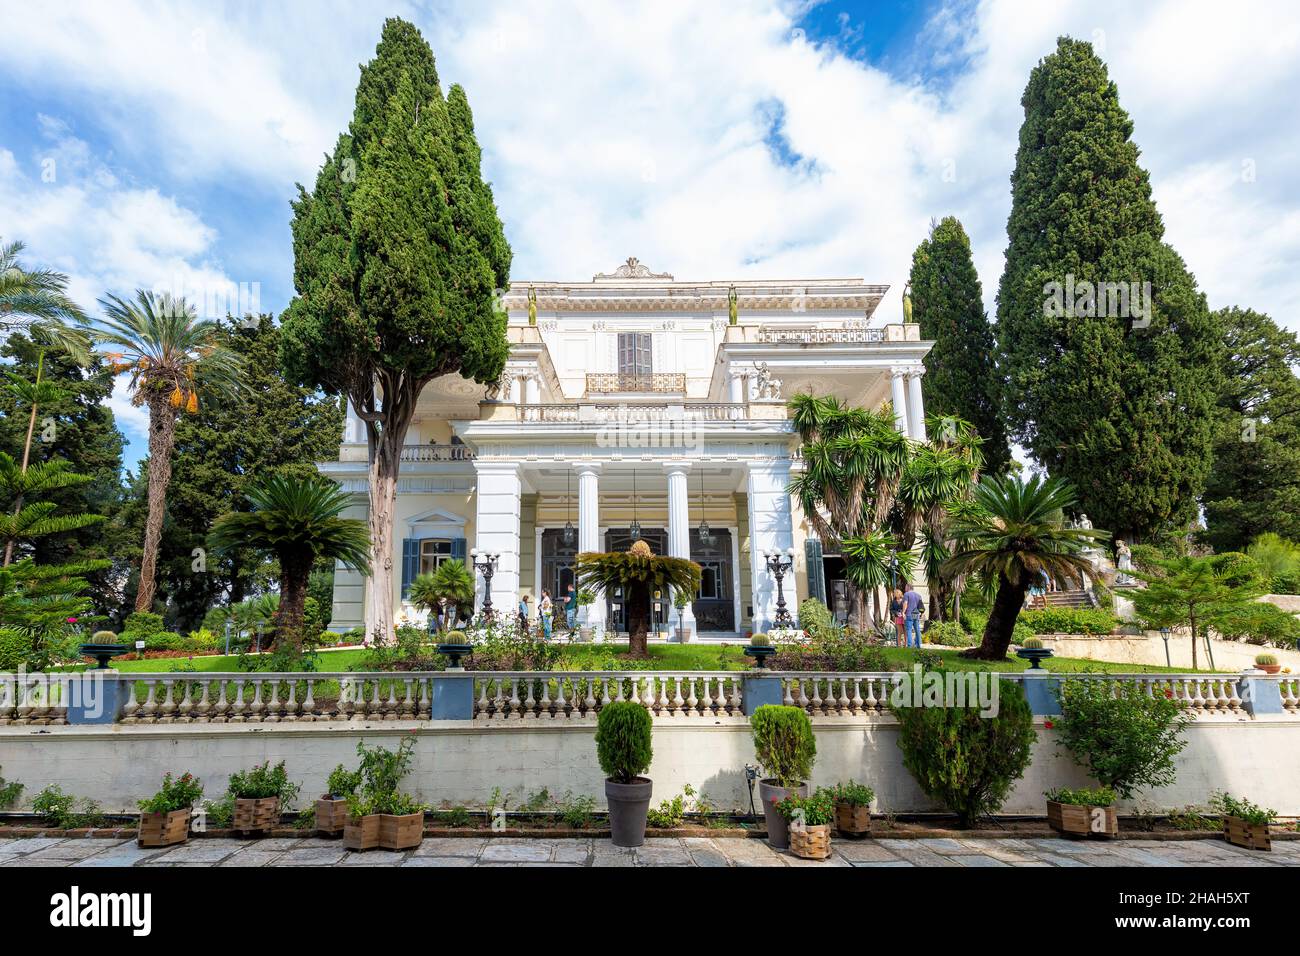 Corfu, Greece - October 24, 2021: A view of the entrance to the Achillion Palace, which is situated on the island of Corfu. Stock Photo